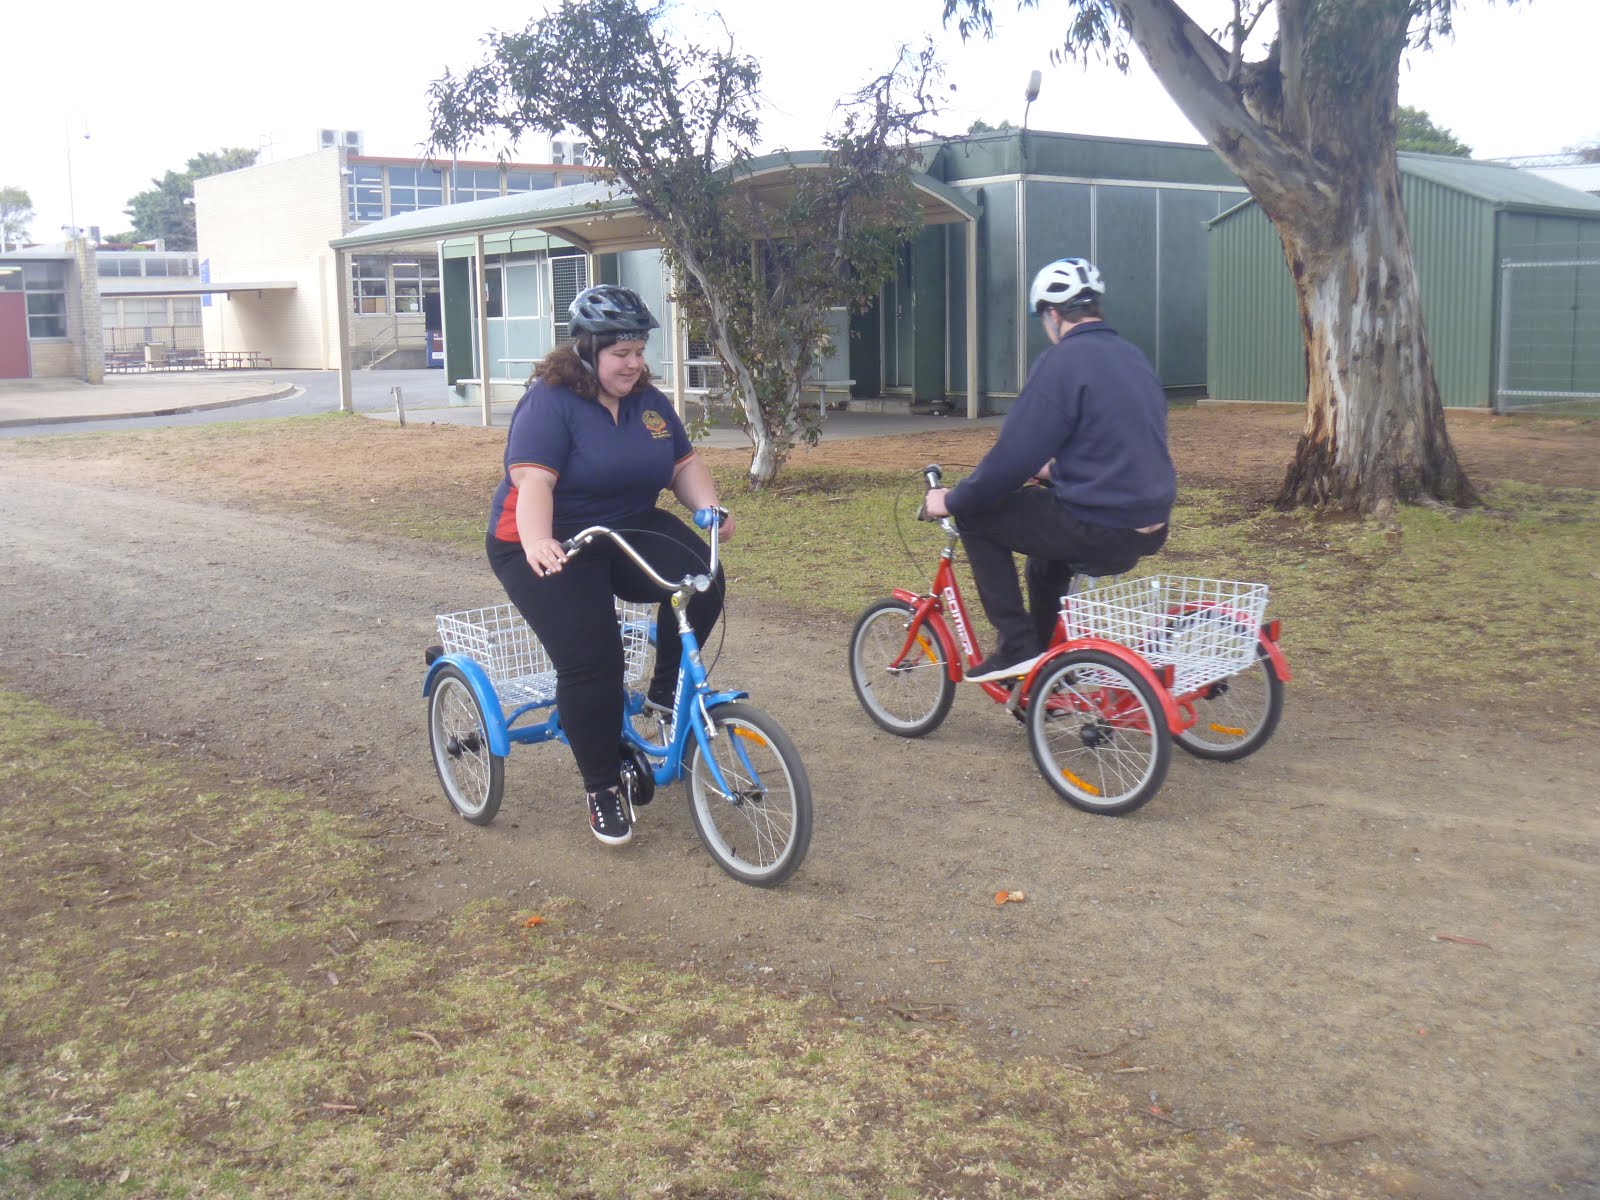 Riding the tricycles  as part of our fitness programme is great exercise.